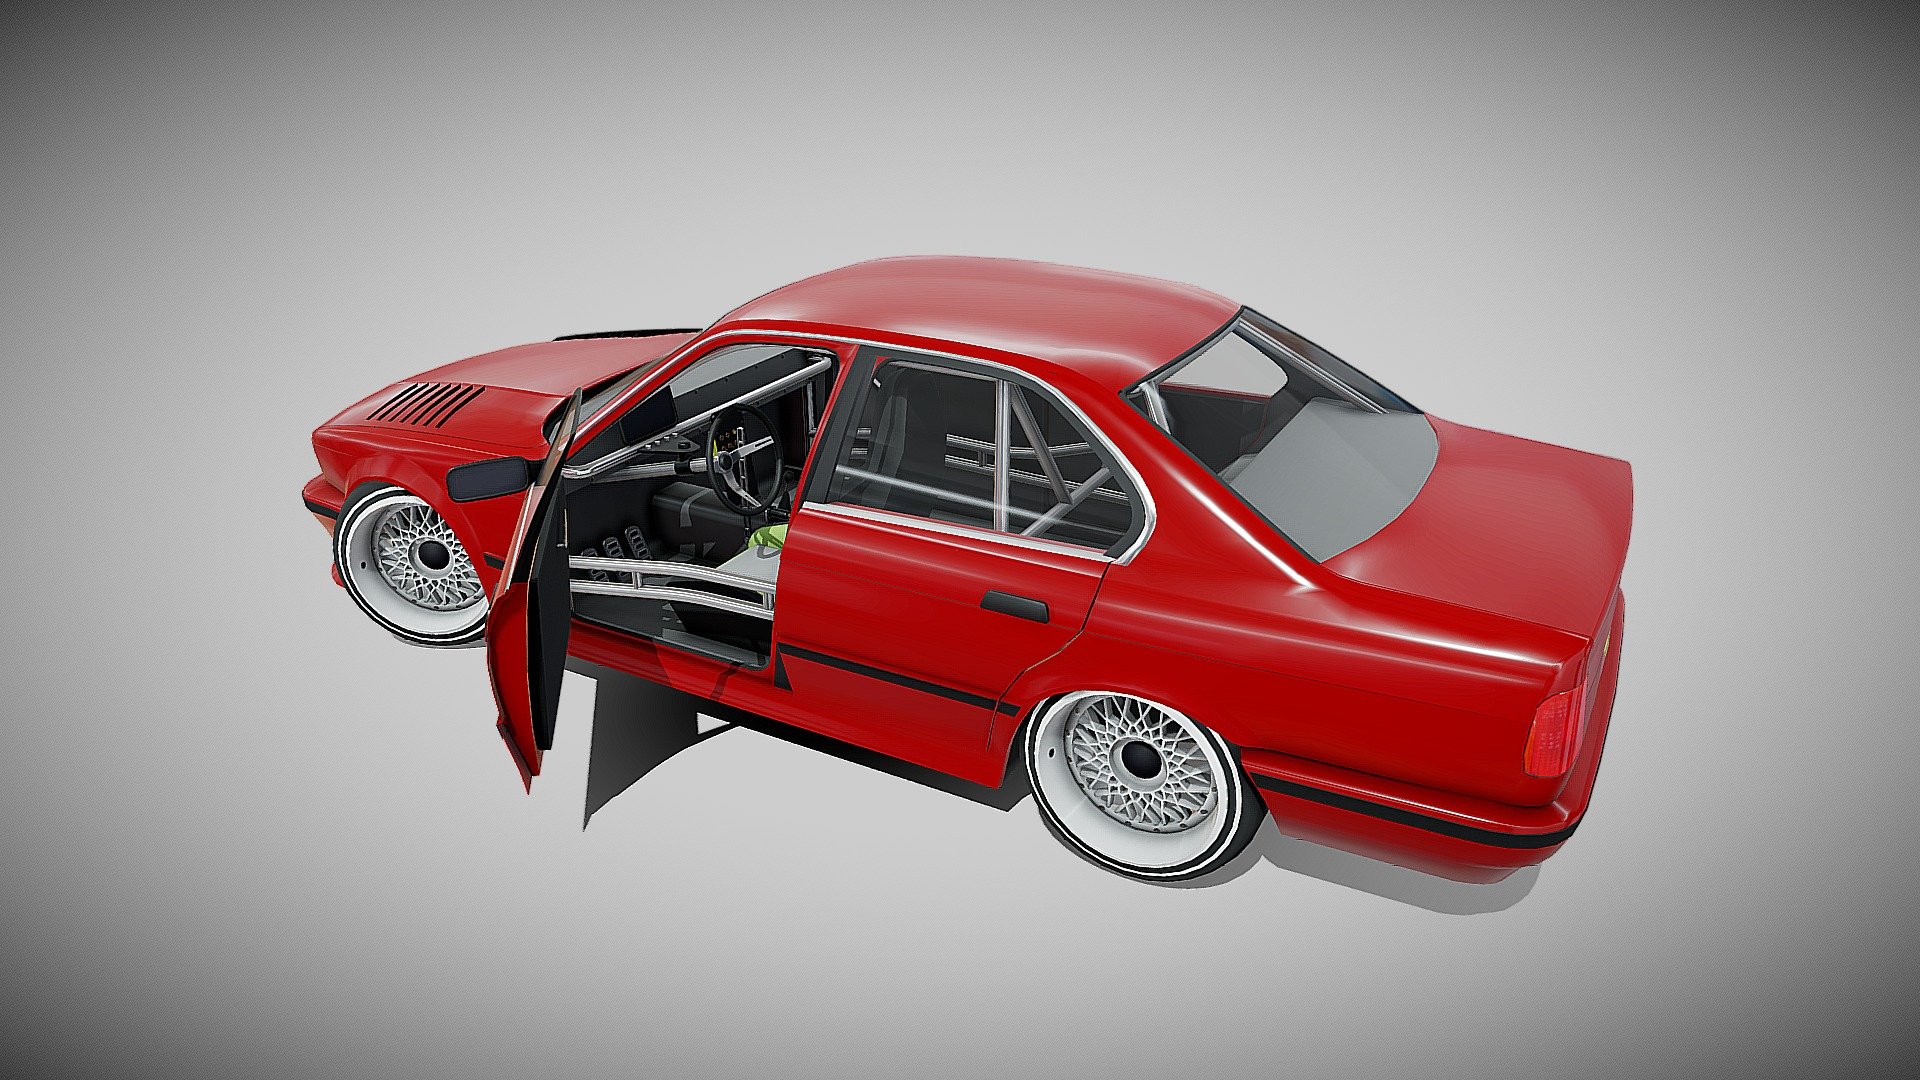 Lowpoly game ready drifter (BMW). Ready to use in game engines. Easy to apply to all kinds of car physics in Unity engine. The model is divided into parts: doors, glass, wheels 3d model